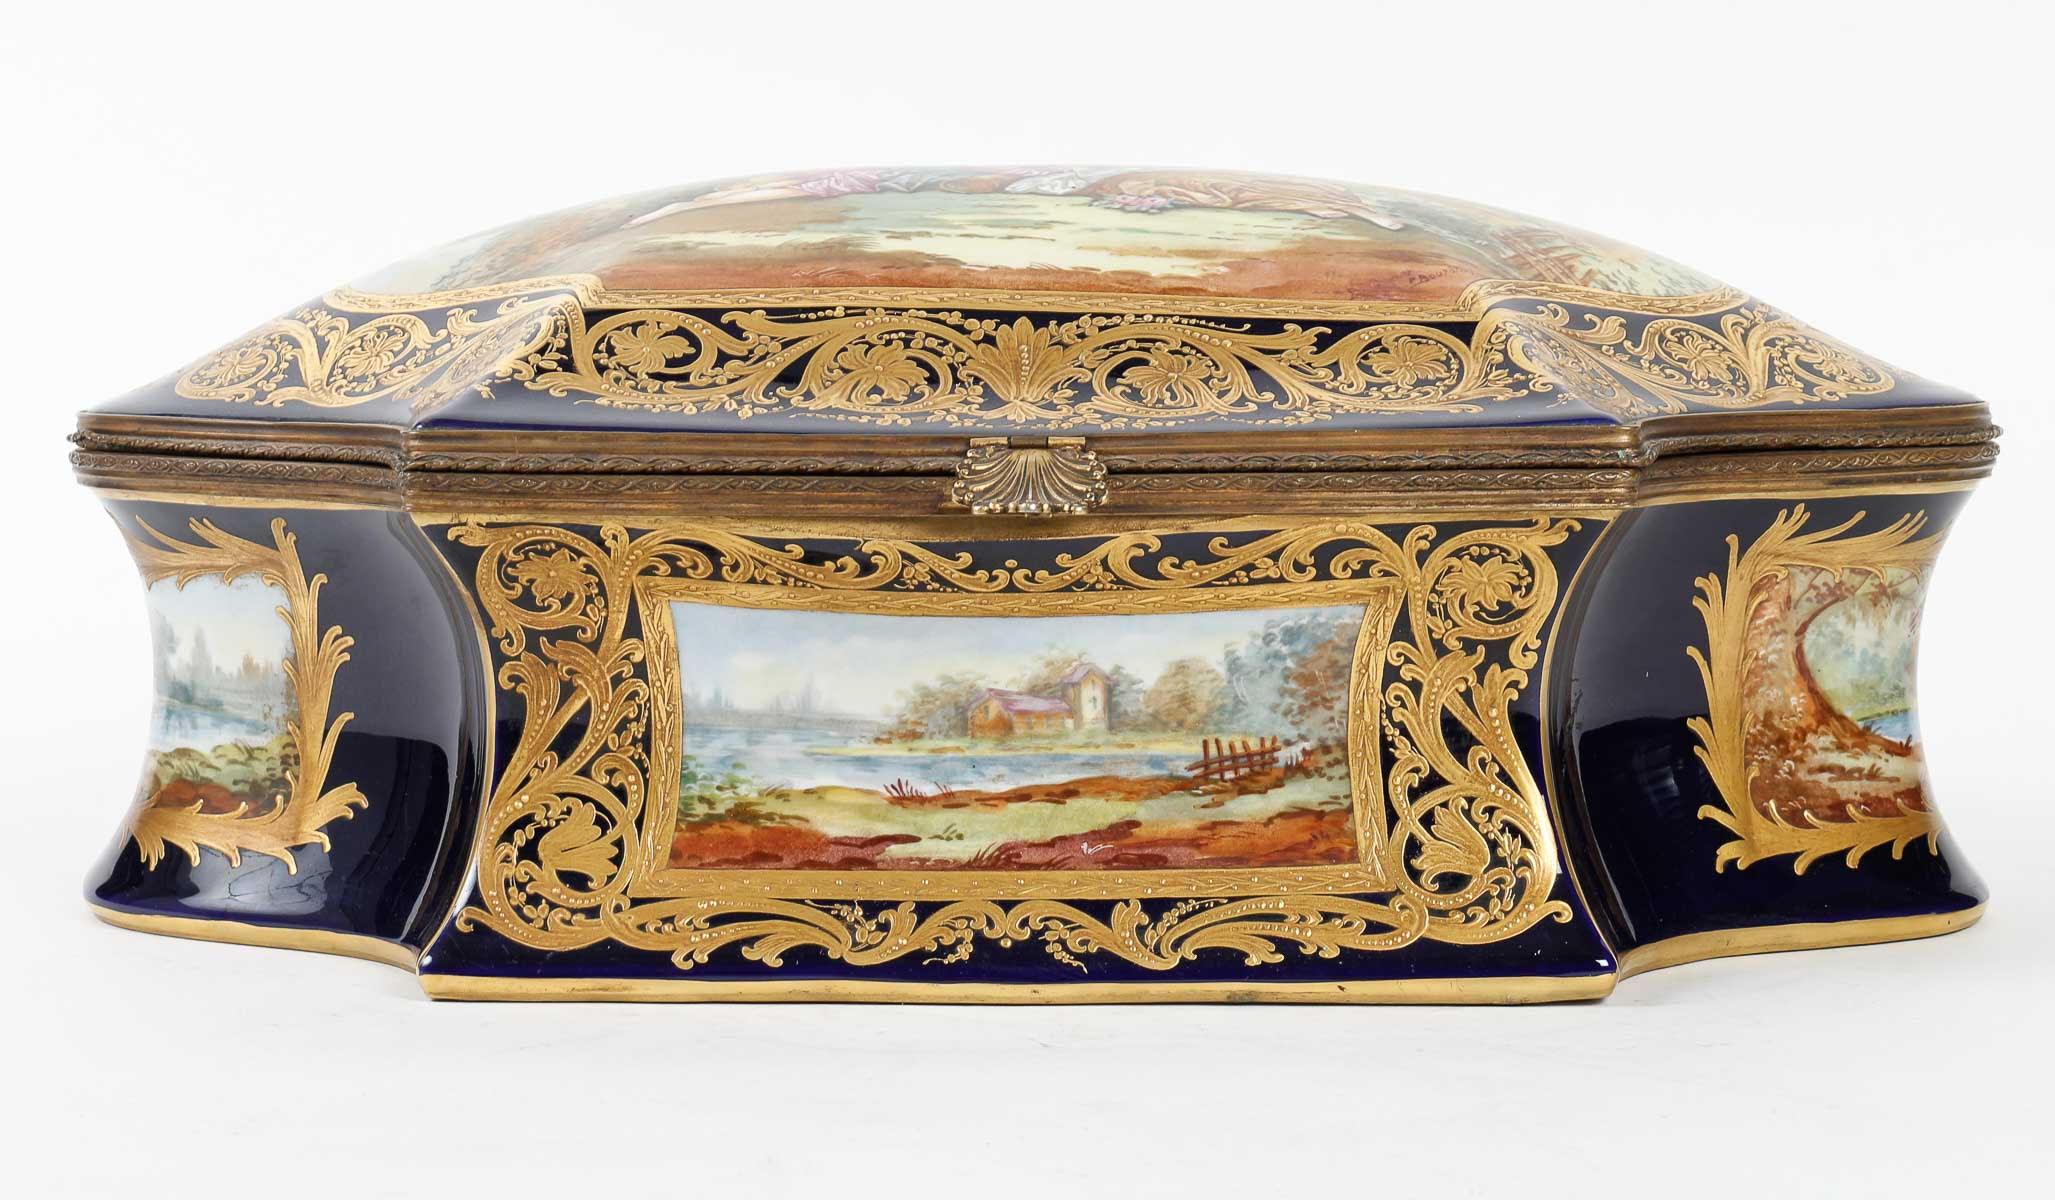 Large jewellery box in the taste of Sèvres, 19th century.

A Napoleon III period jewellery box, 19th century, in Sèvres style porcelain and gilt bronze mounting.

H: 17cm, W: 41.5cm, D: 25.5cm